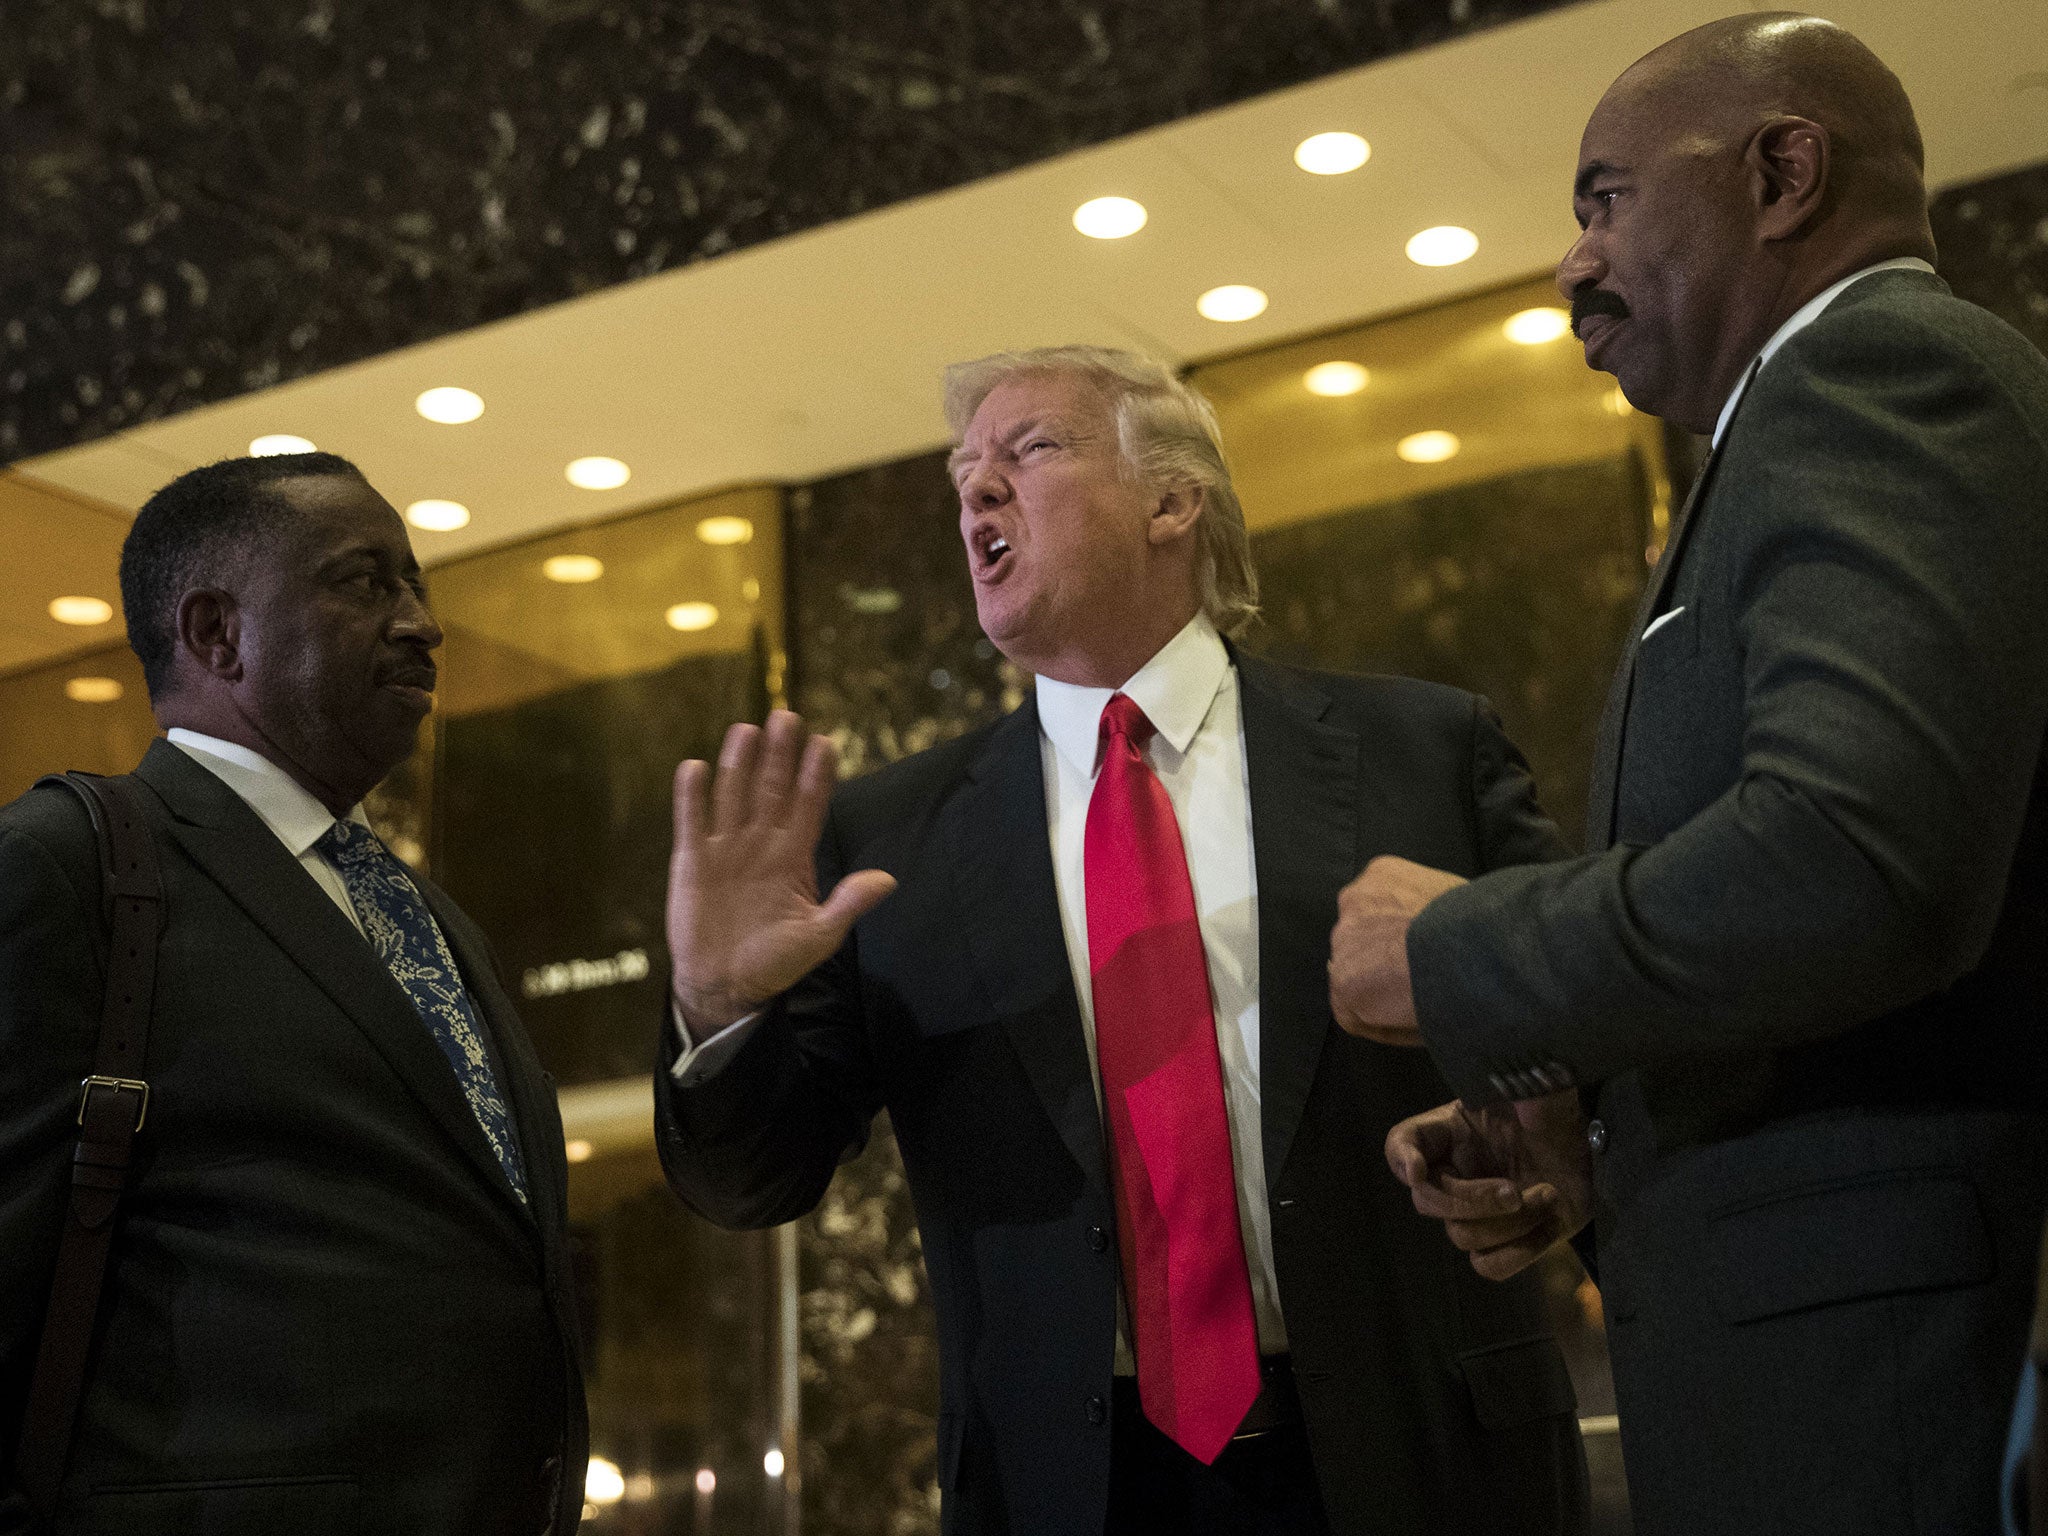 President-elect Donald Trump (C) and television personality Steve Harvey (R) speak to reporters after their meeting at Trump Tower on 13 January, 2017